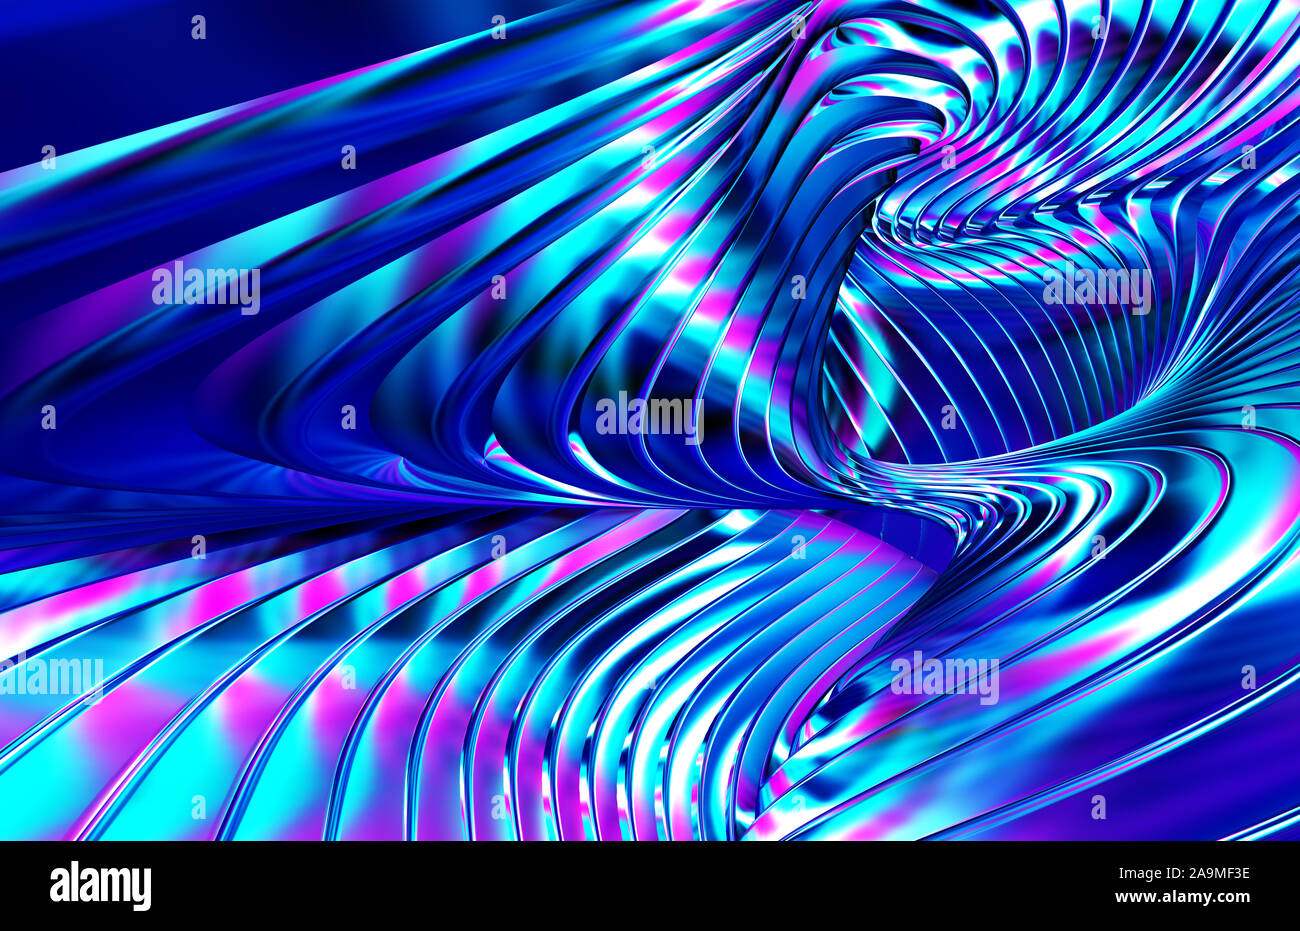 Abstract Futuristic Metal Background. Unreal Shapes From Iridescent Stripes. 3D Illustration. Stock Photo